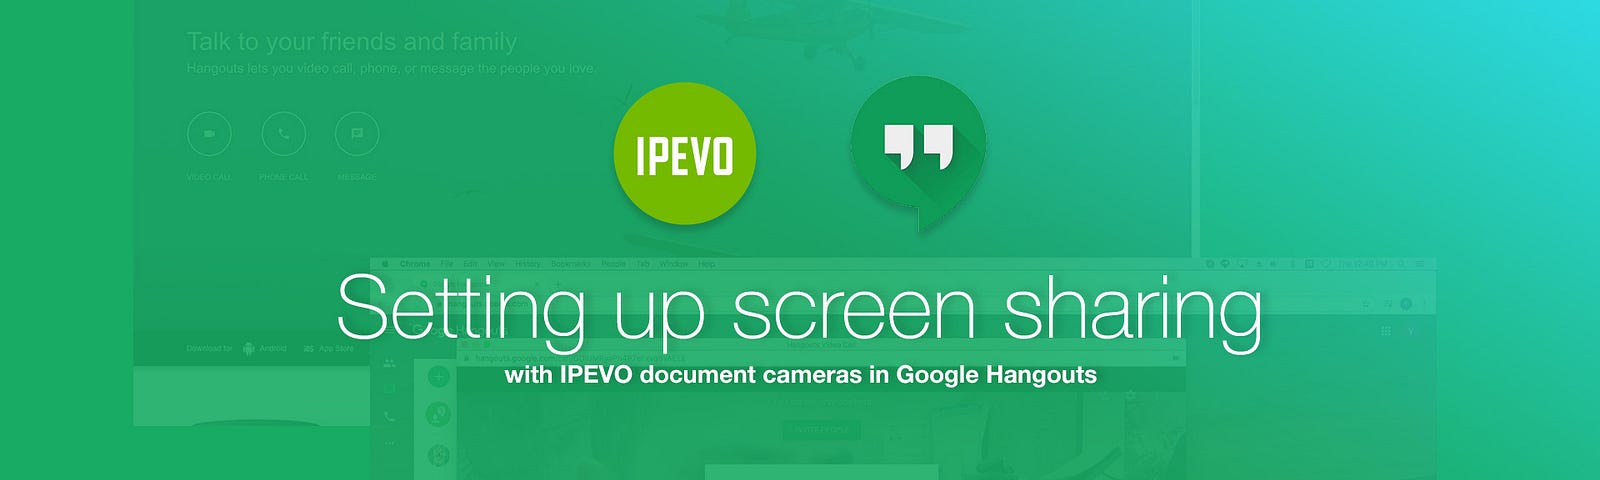 Setting up screen sharing with IPEVO document cameras in Google Hangouts